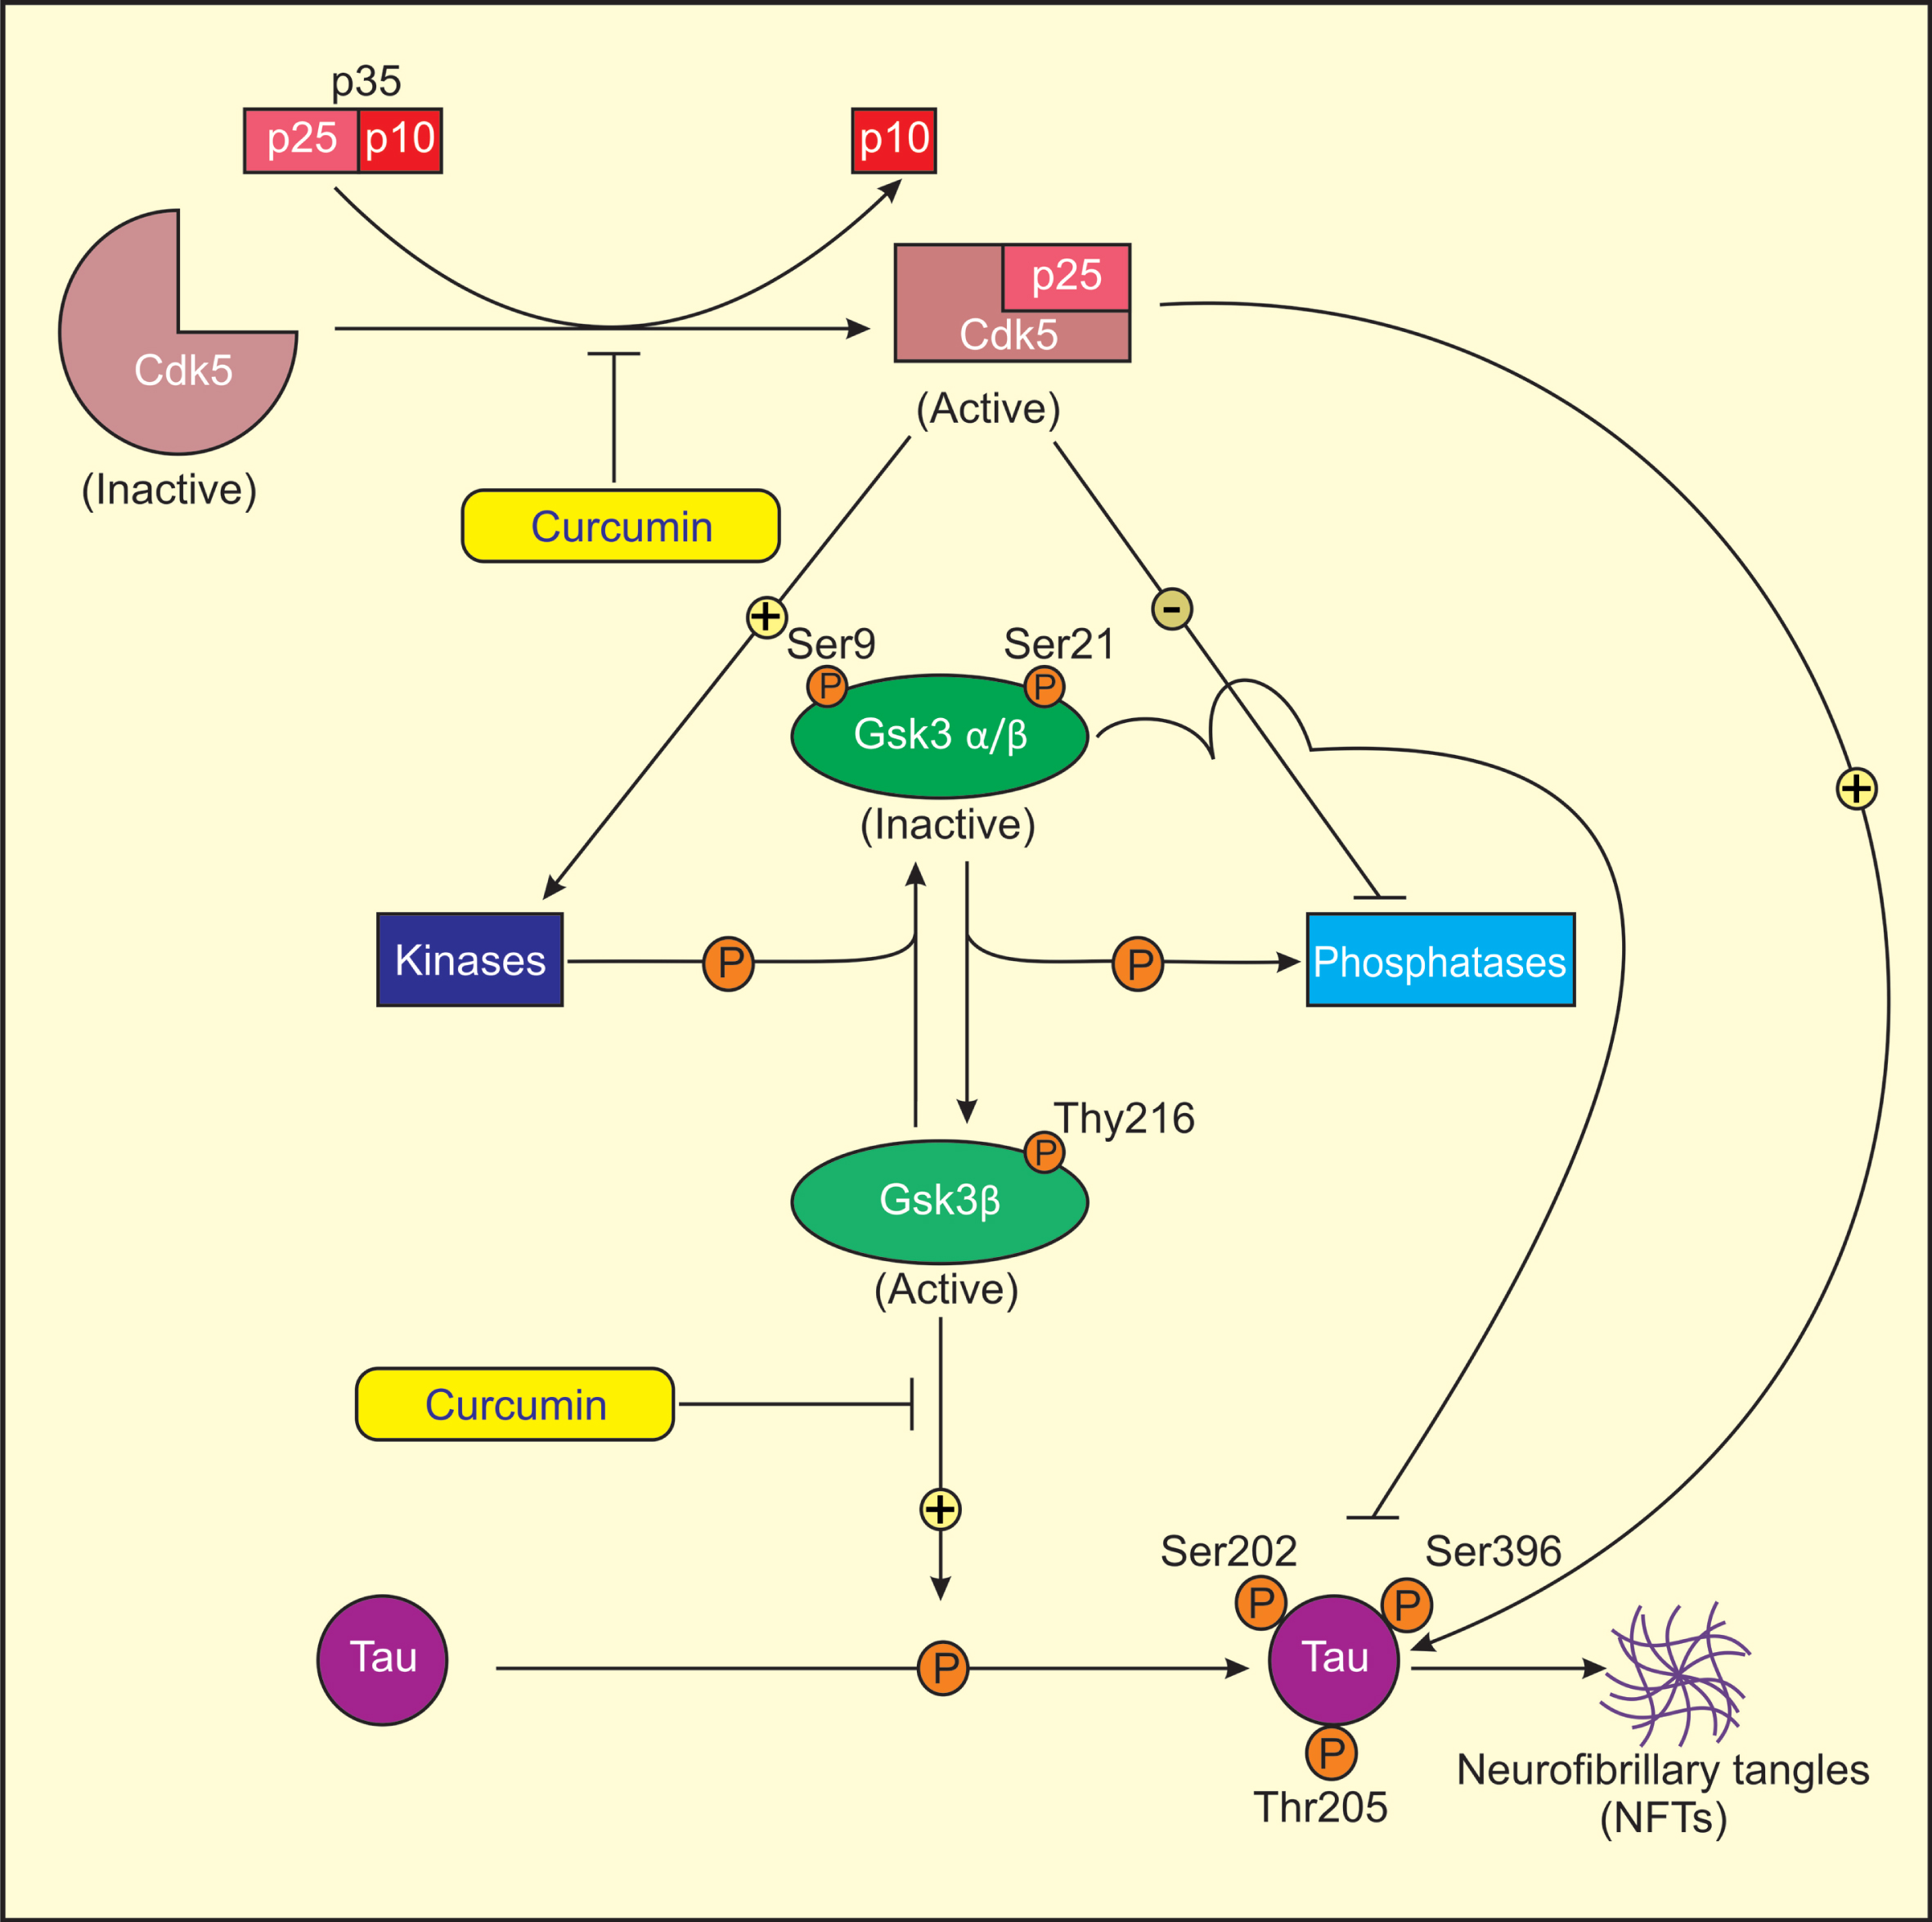 Proposed model for mechanism of action of curcumin in treatment of AD. Cdk5 is activated by its association with p25, as Cdk5-p25 complex is more stable than Cdk5-p35 complex. Activated Cdk5 induces GSK3 phosphorylation (Ser9/21, Tyr216) by direct/indirect regulation of several protein kinases and phosphatases. Ser9/21 phosphorylation of GSK3 renders GSK3 inactive. Activated Cdk5 directly or indirectly induces tau phosphorylation at sites Ser202, Ser396, and Thr205 through activated GSK3 (Tyr216) that results in the formation of NFTs in AD. Curcumin lowers the levels of Cdk5/p25 and active GSK3β (Tyr216) and increases the levels of inactive GSK3β (Ser9/21) in AD rats causing reduced tau hyperphosphorylation.